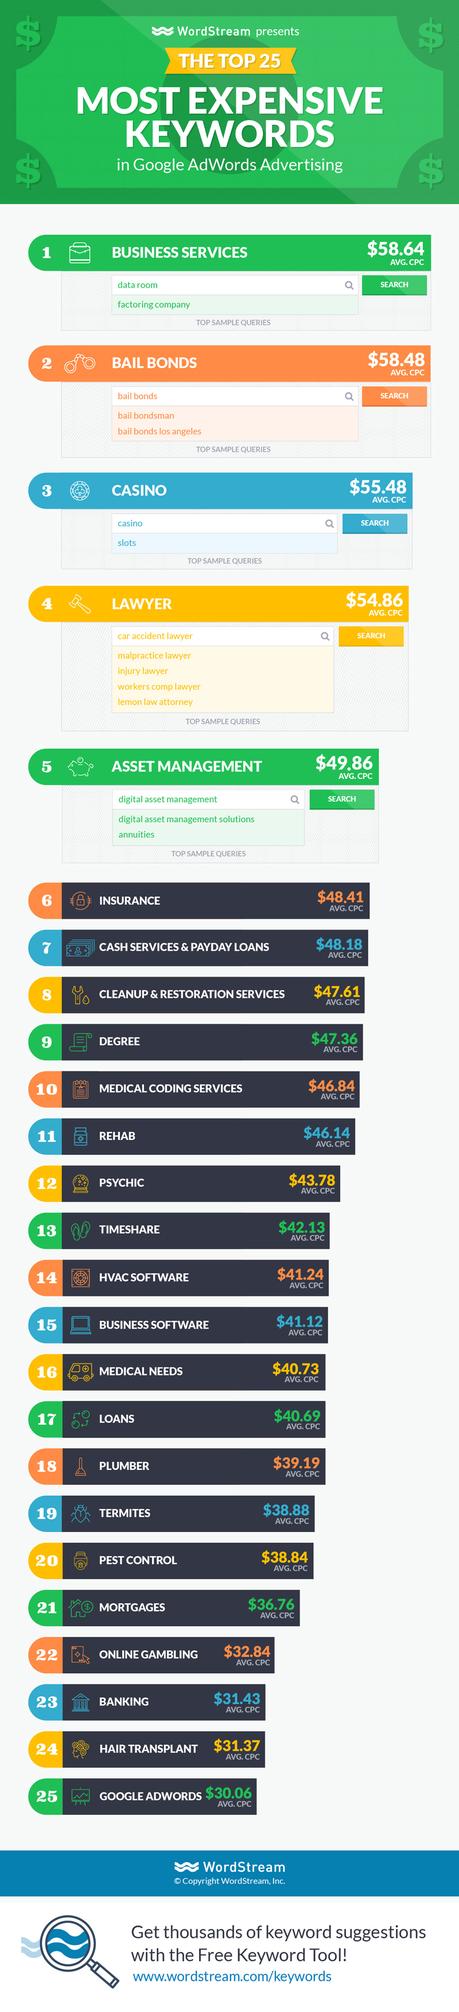 Most expensive keywords in Adwords